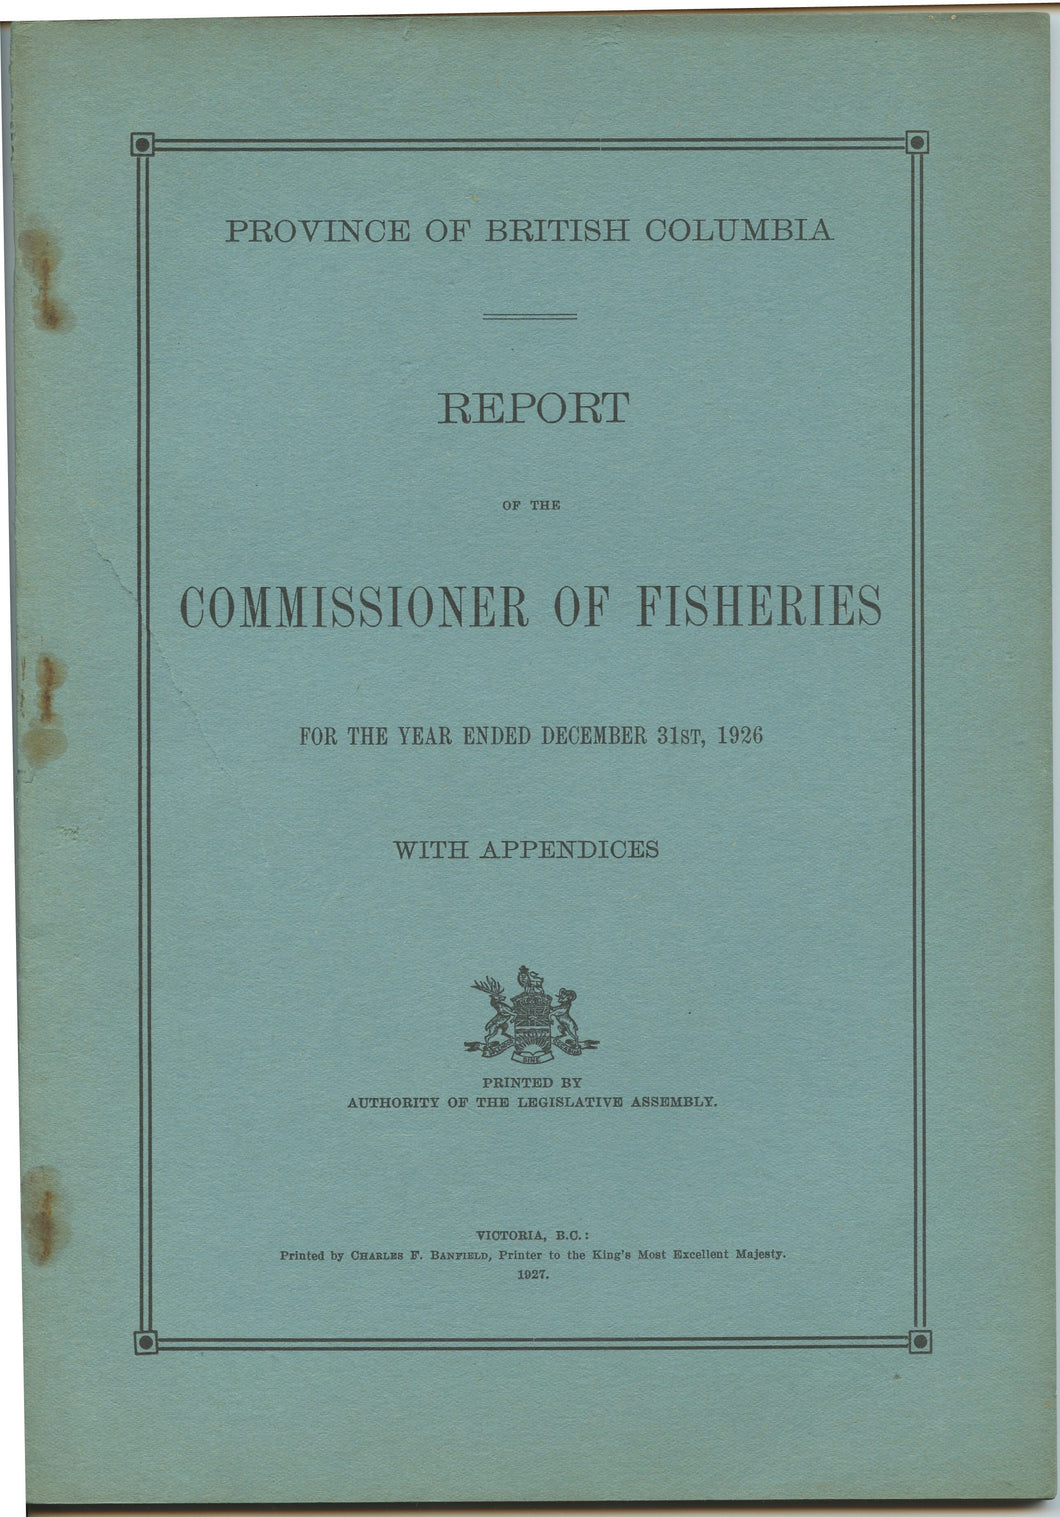 Province of British Columbia Report of the Commissioner of Fisheries For the Year Ending December 31st, 1926 With Appendices